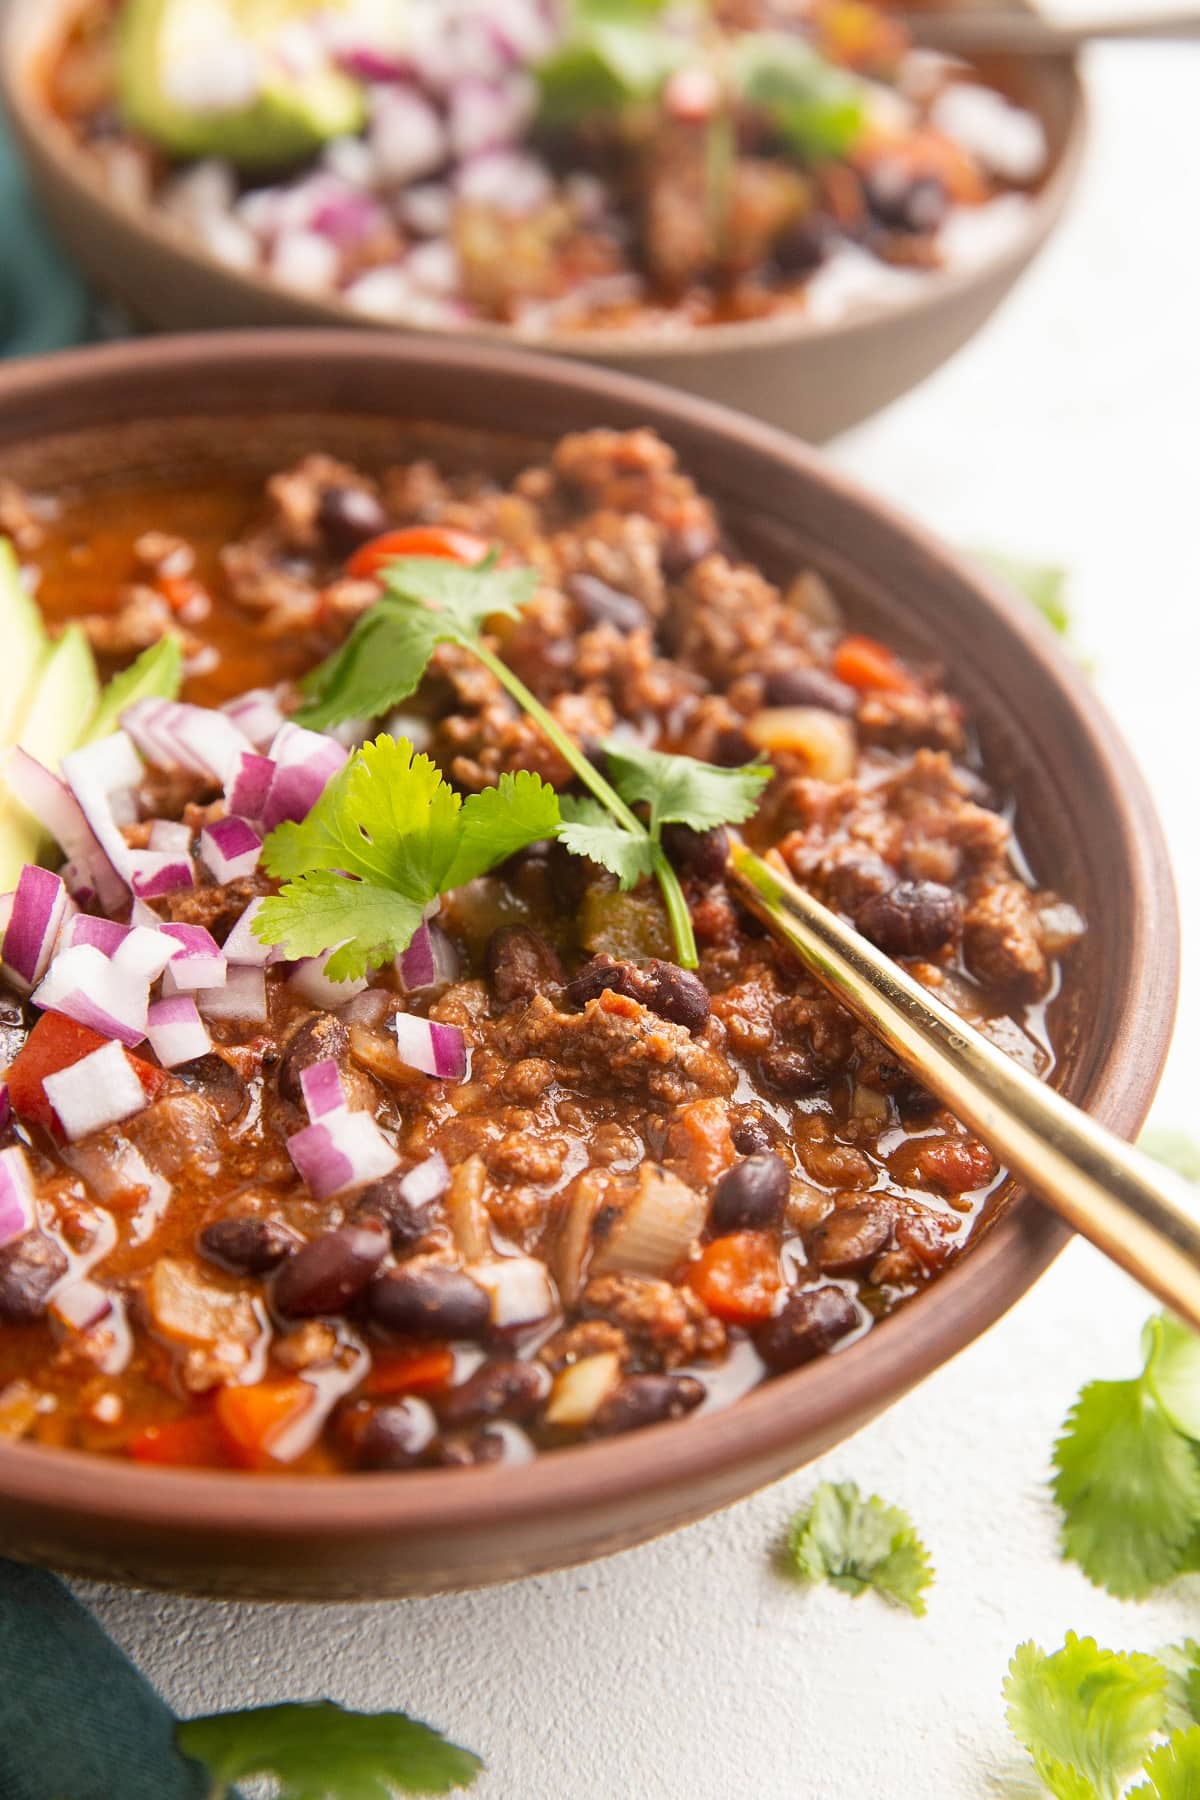 https://www.theroastedroot.net/wp-content/uploads/2023/02/stove-top-beef-chili-8.jpg